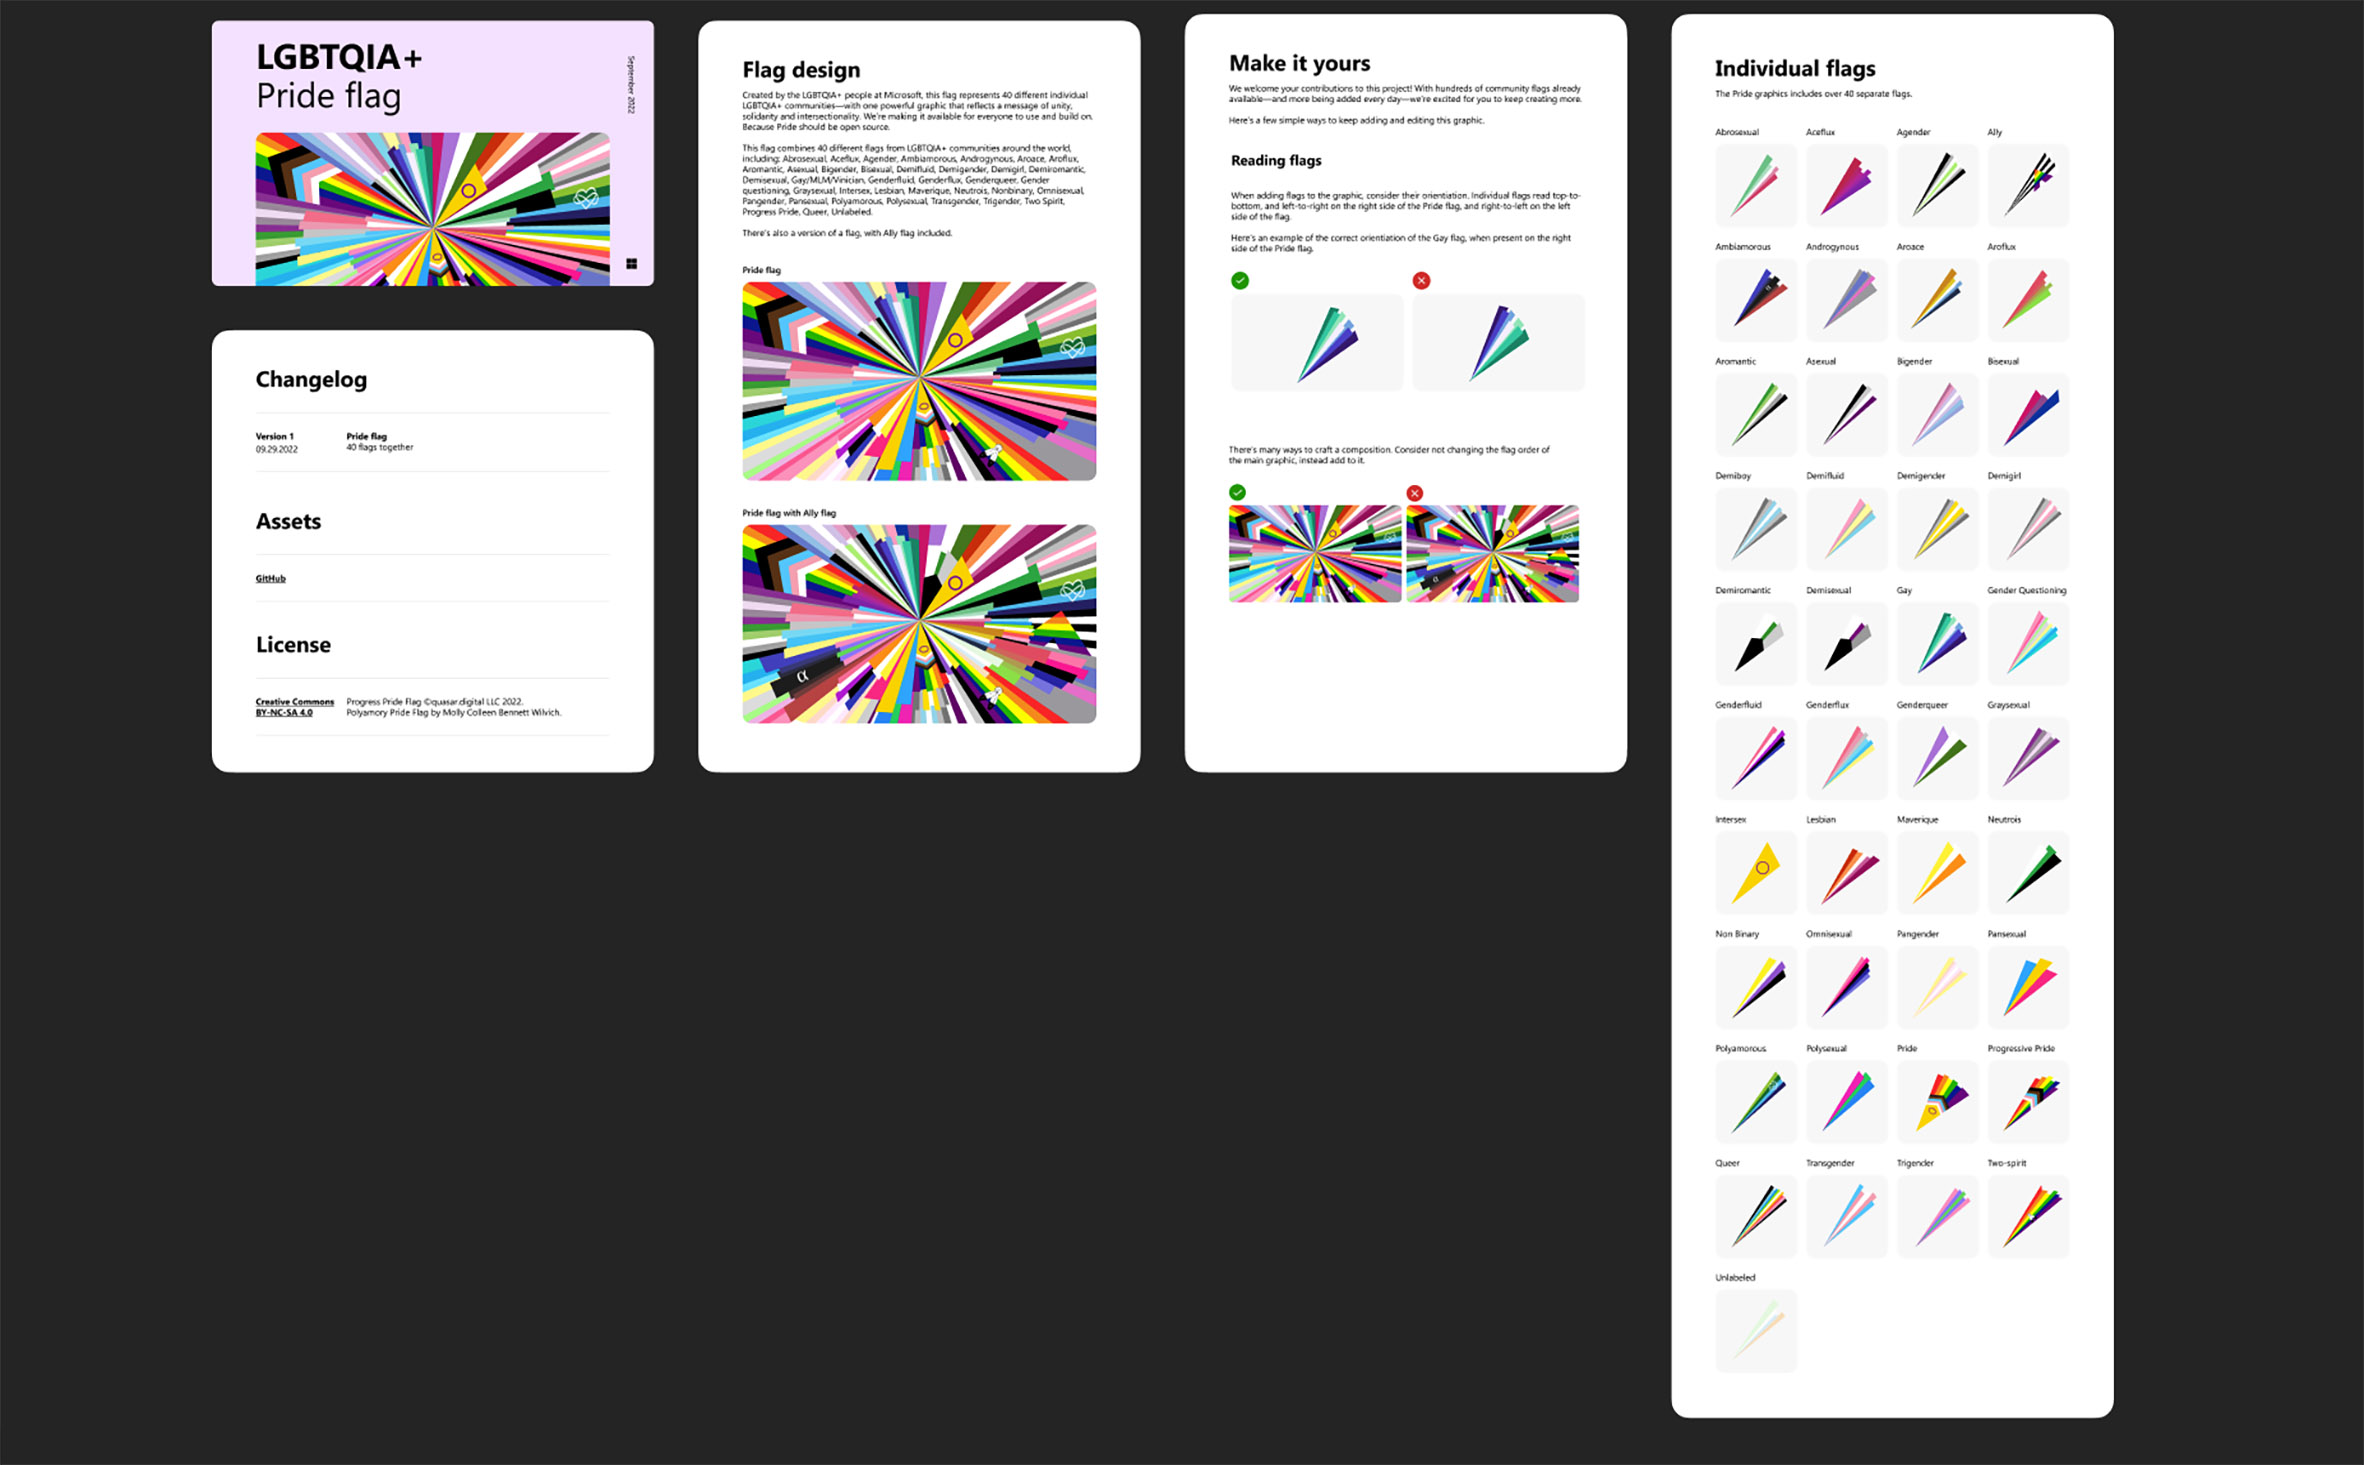 Figma guide for editing Microsoft's open source pride flag graphic 